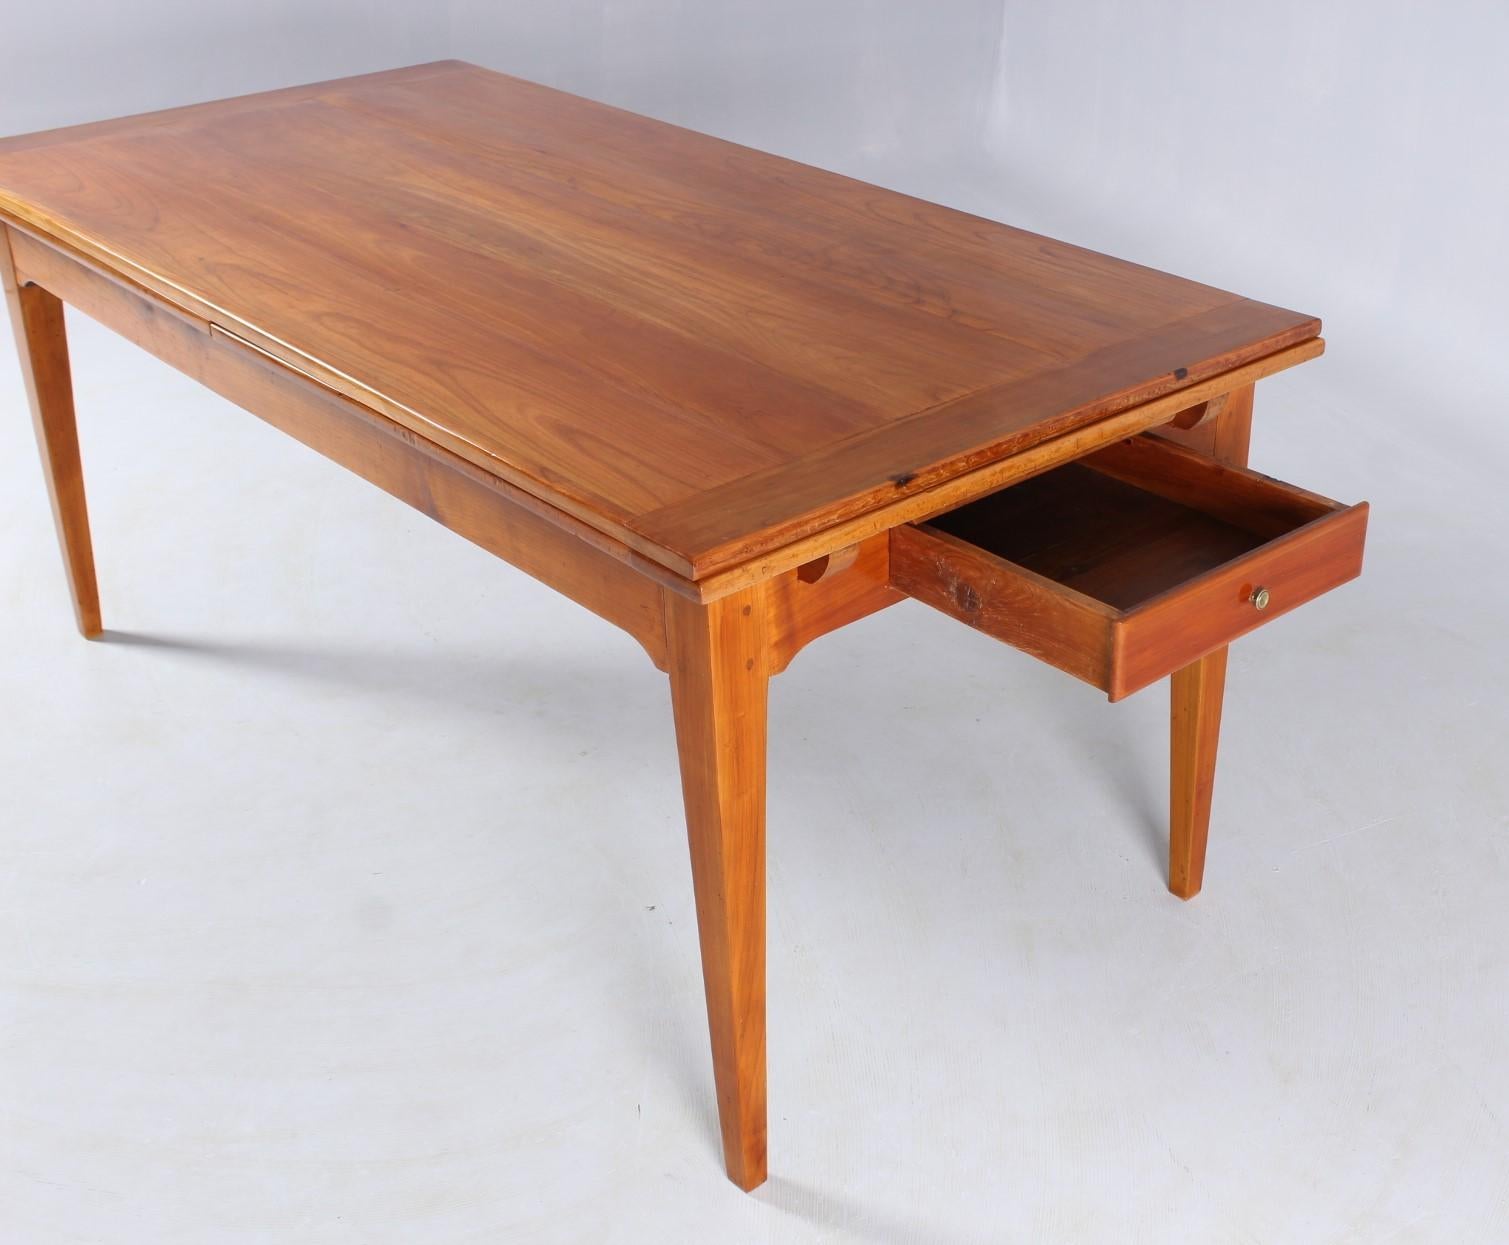 Antique dining table from circa 1910. Solid cherry with old patina. Refurbished ready for living, lovingly restored.

Simple straight legs, no frills, just the pure table.
When pushed together, the table has a length of 180 cm and a width of 89